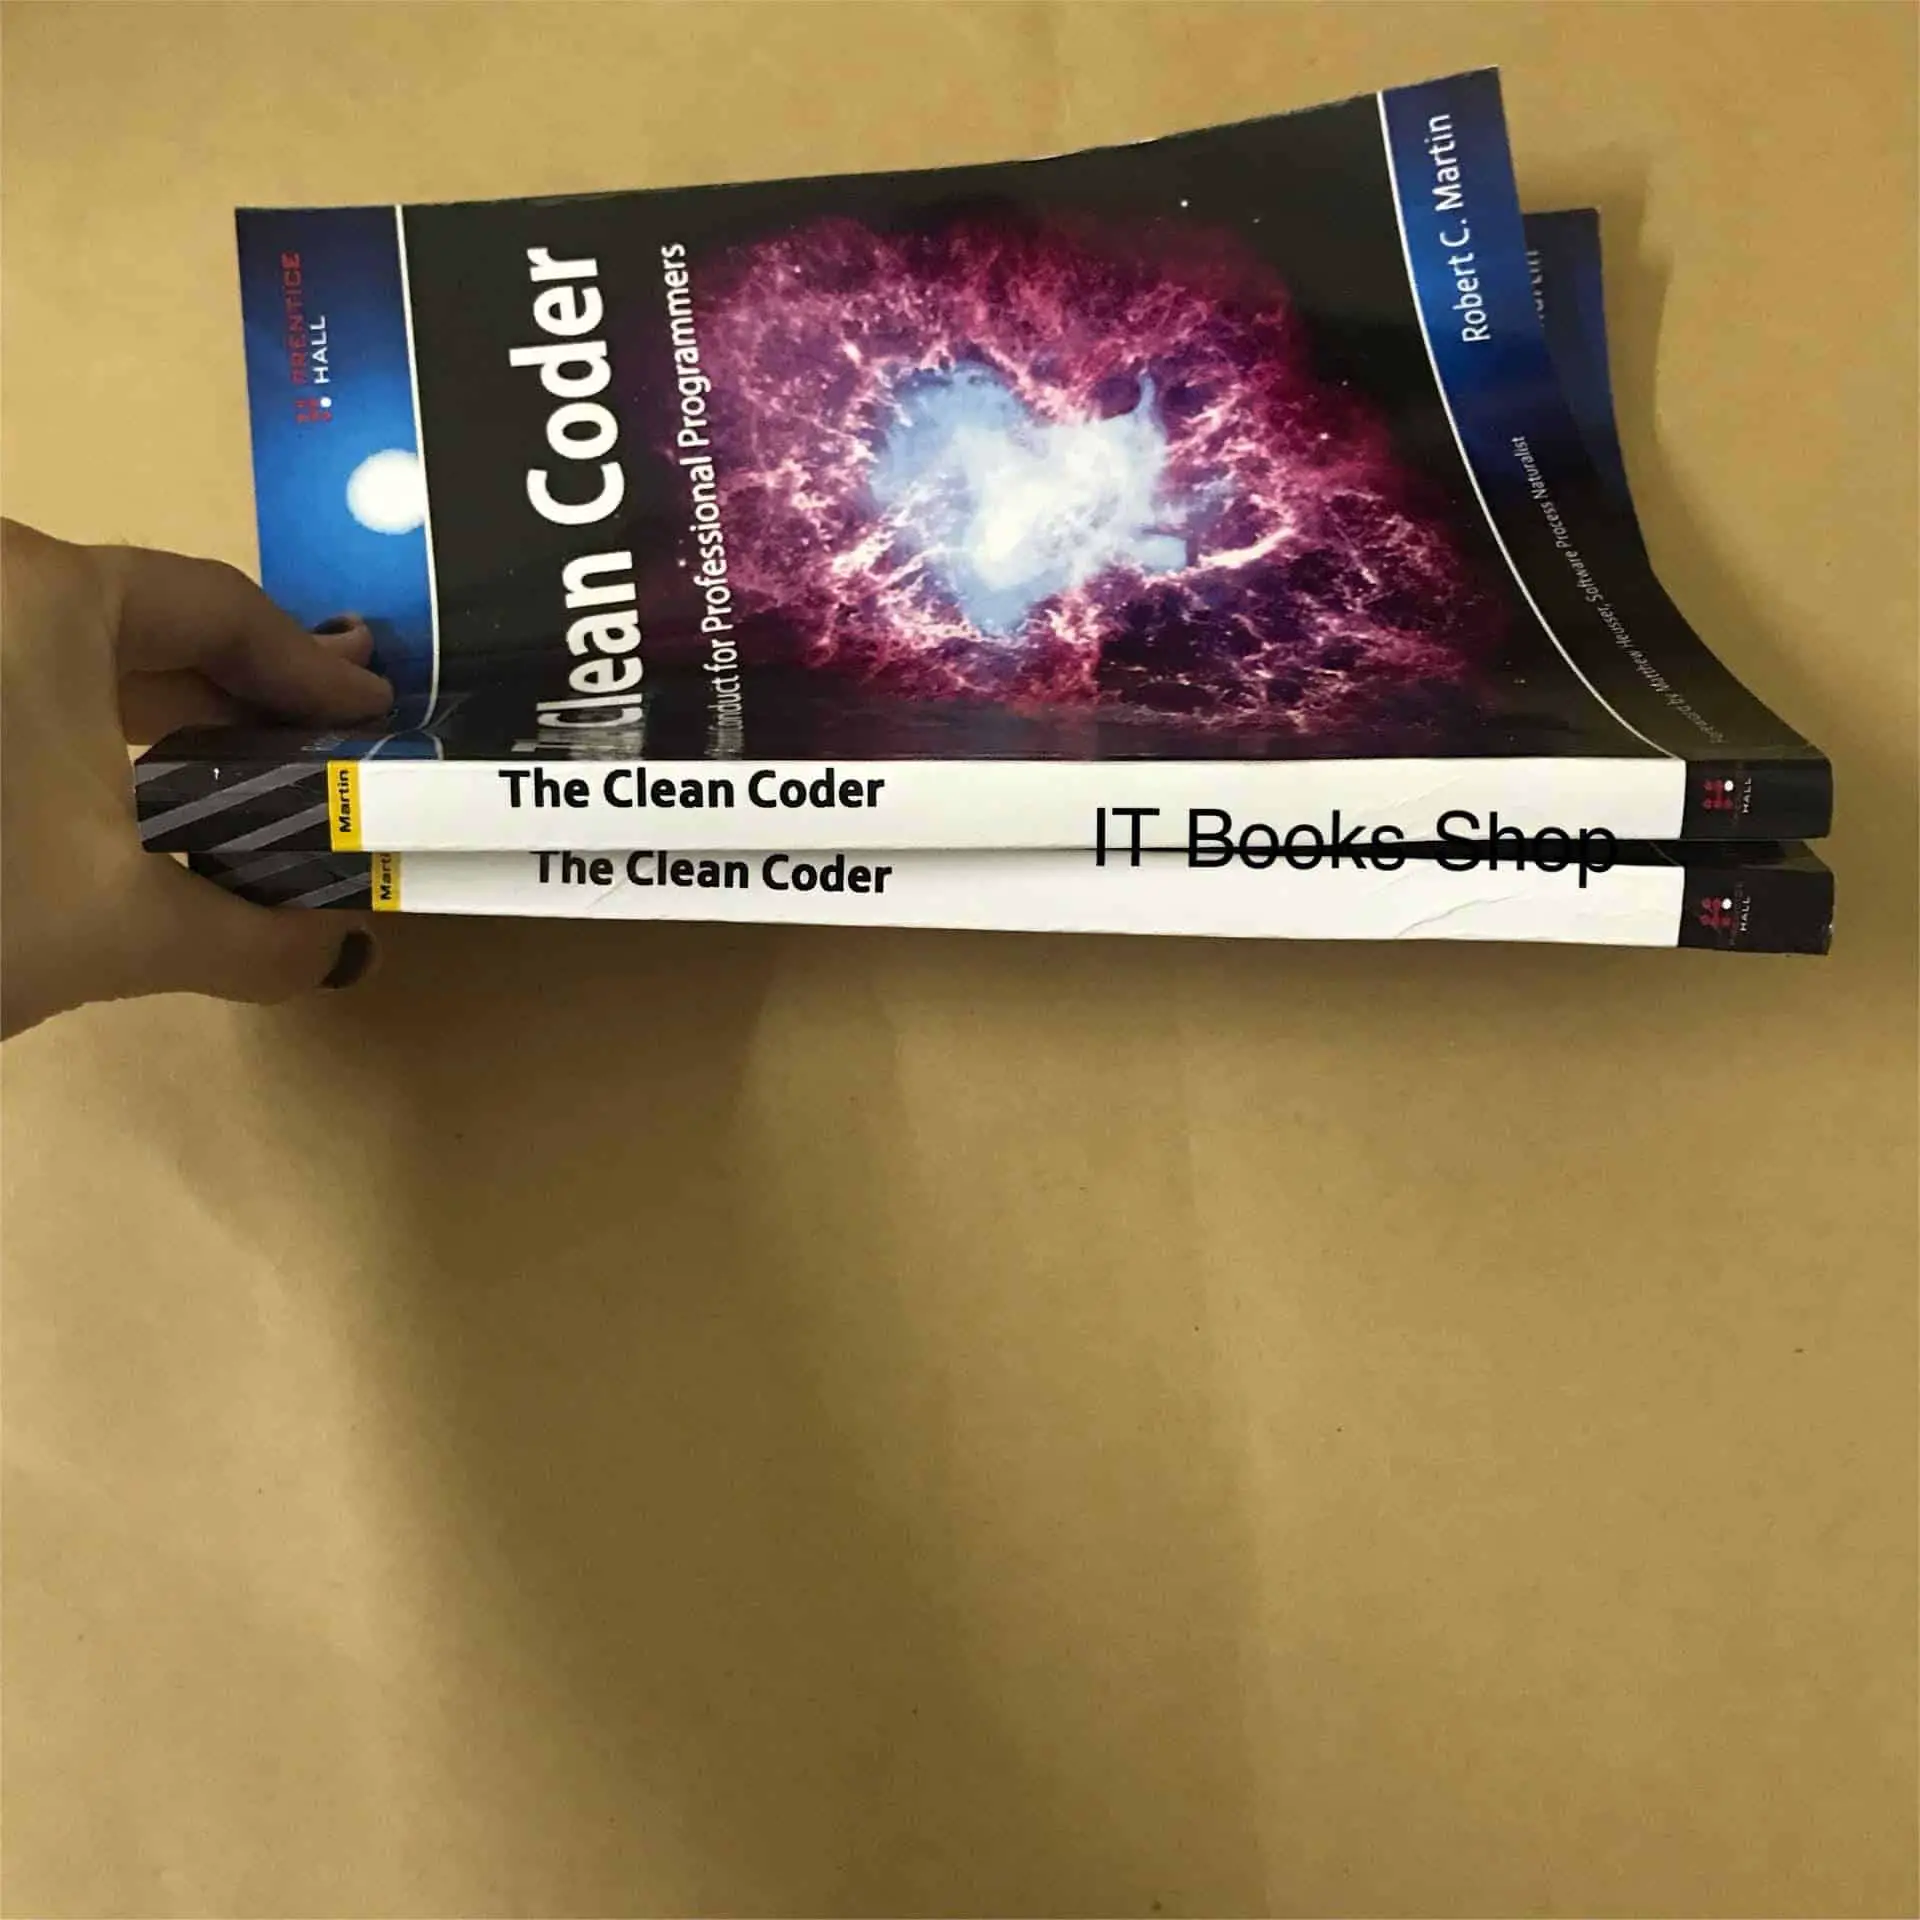 The Clean Coder  IT Books